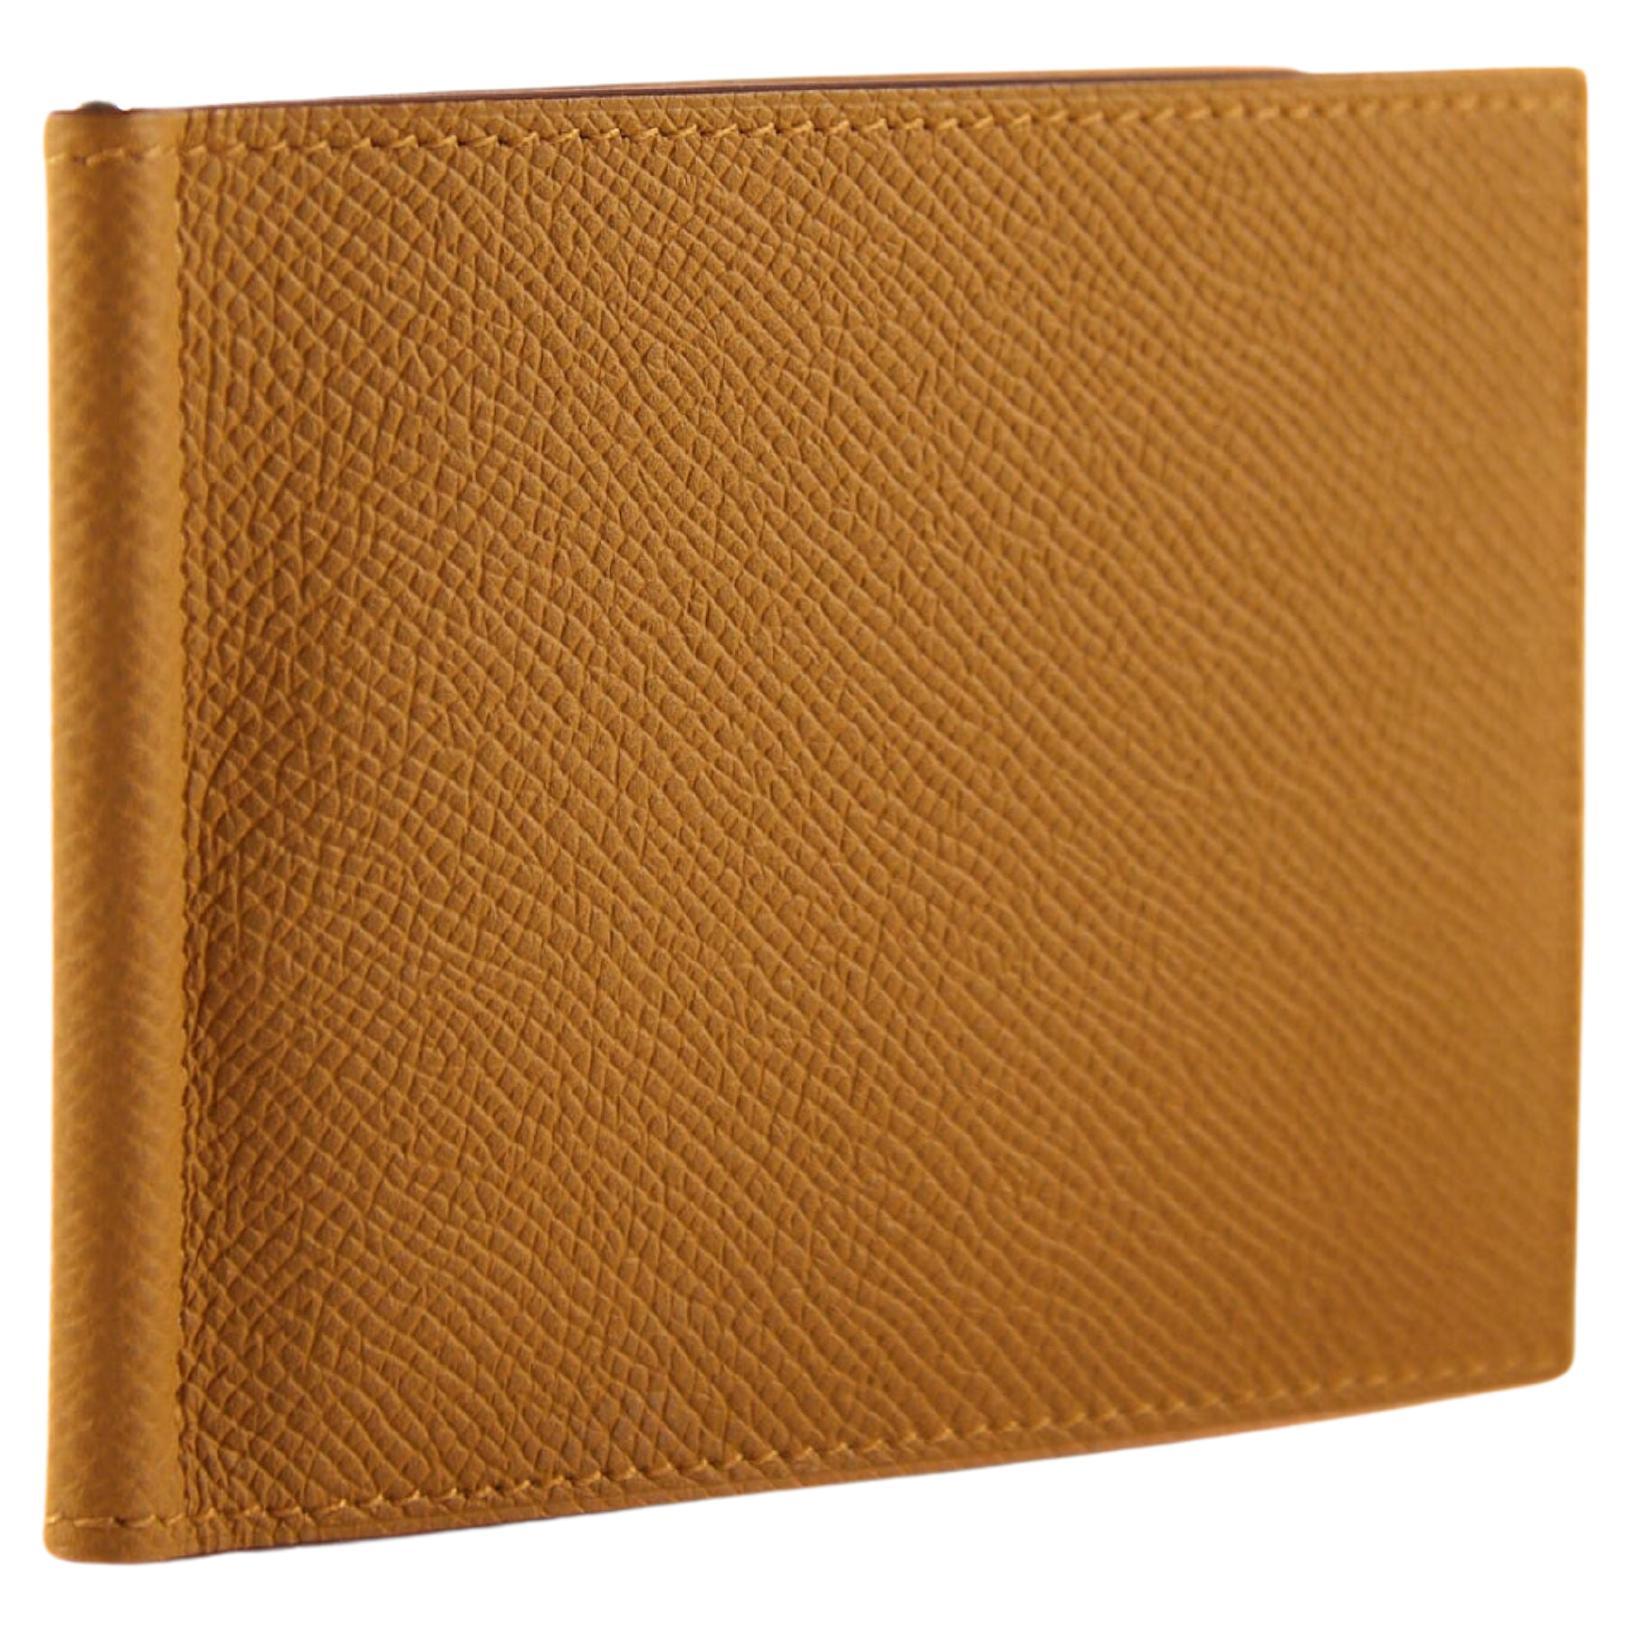 HERMÈS POKER COMPACT WALLET BISCUIT Epsom Leather For Sale